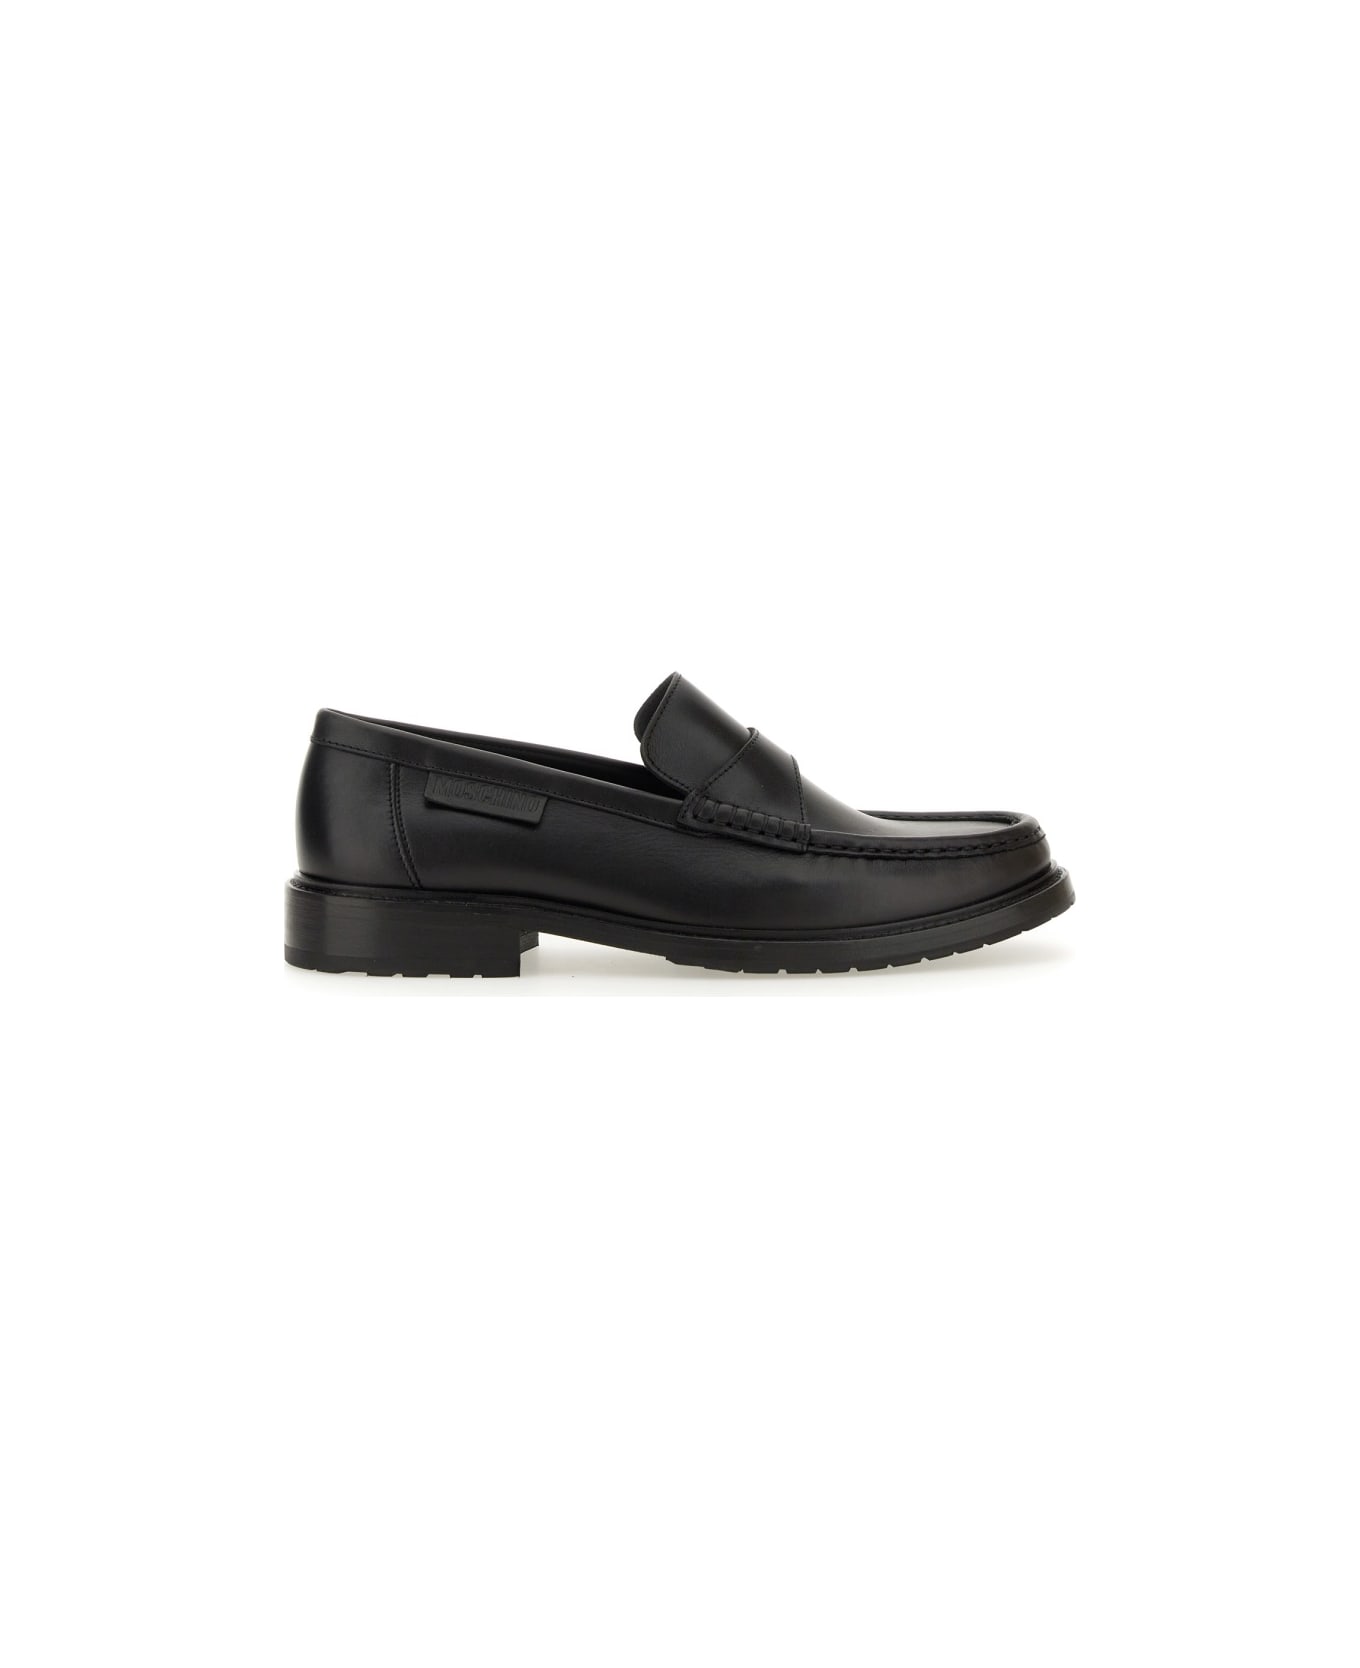 Moschino Leather Loafer - BLACK